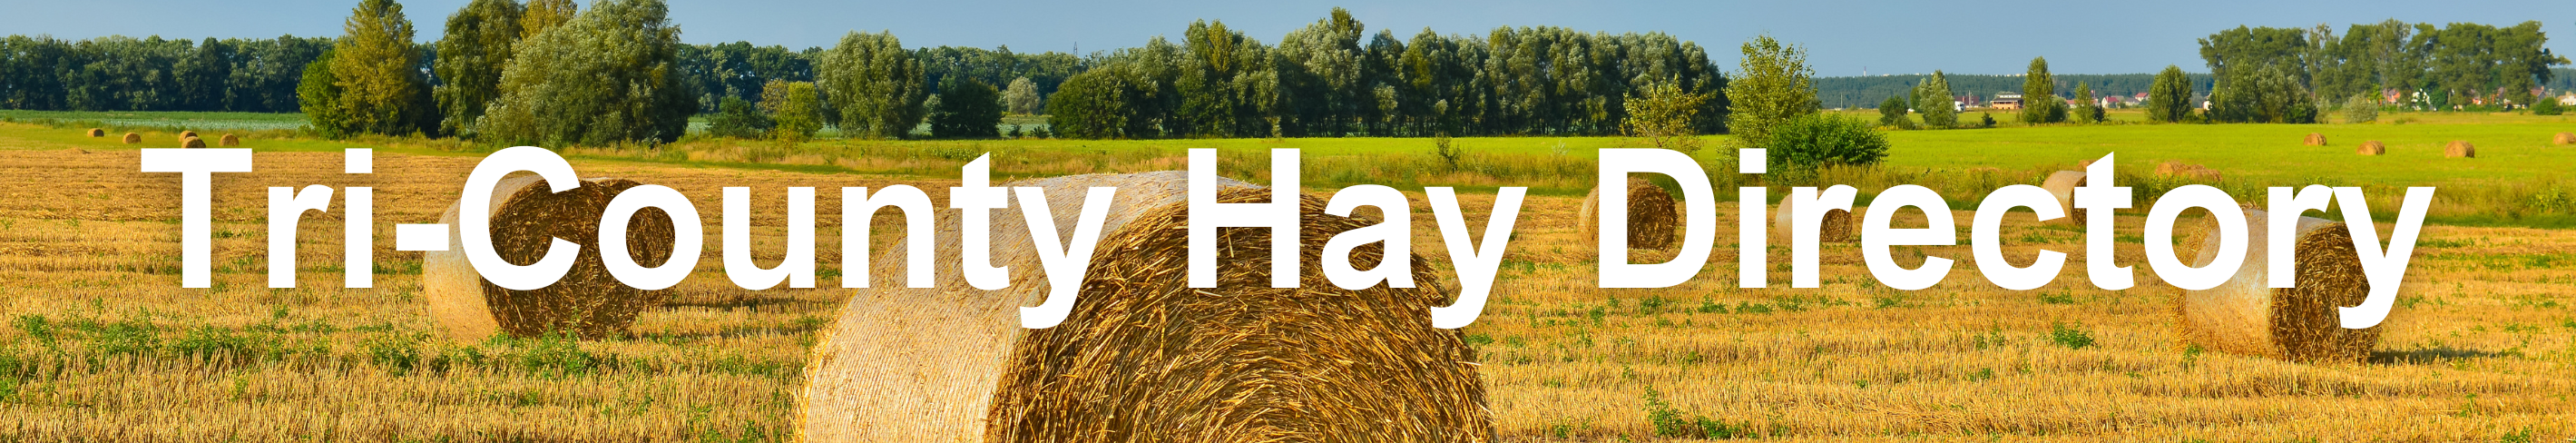 Tri County Hay Directory Banner